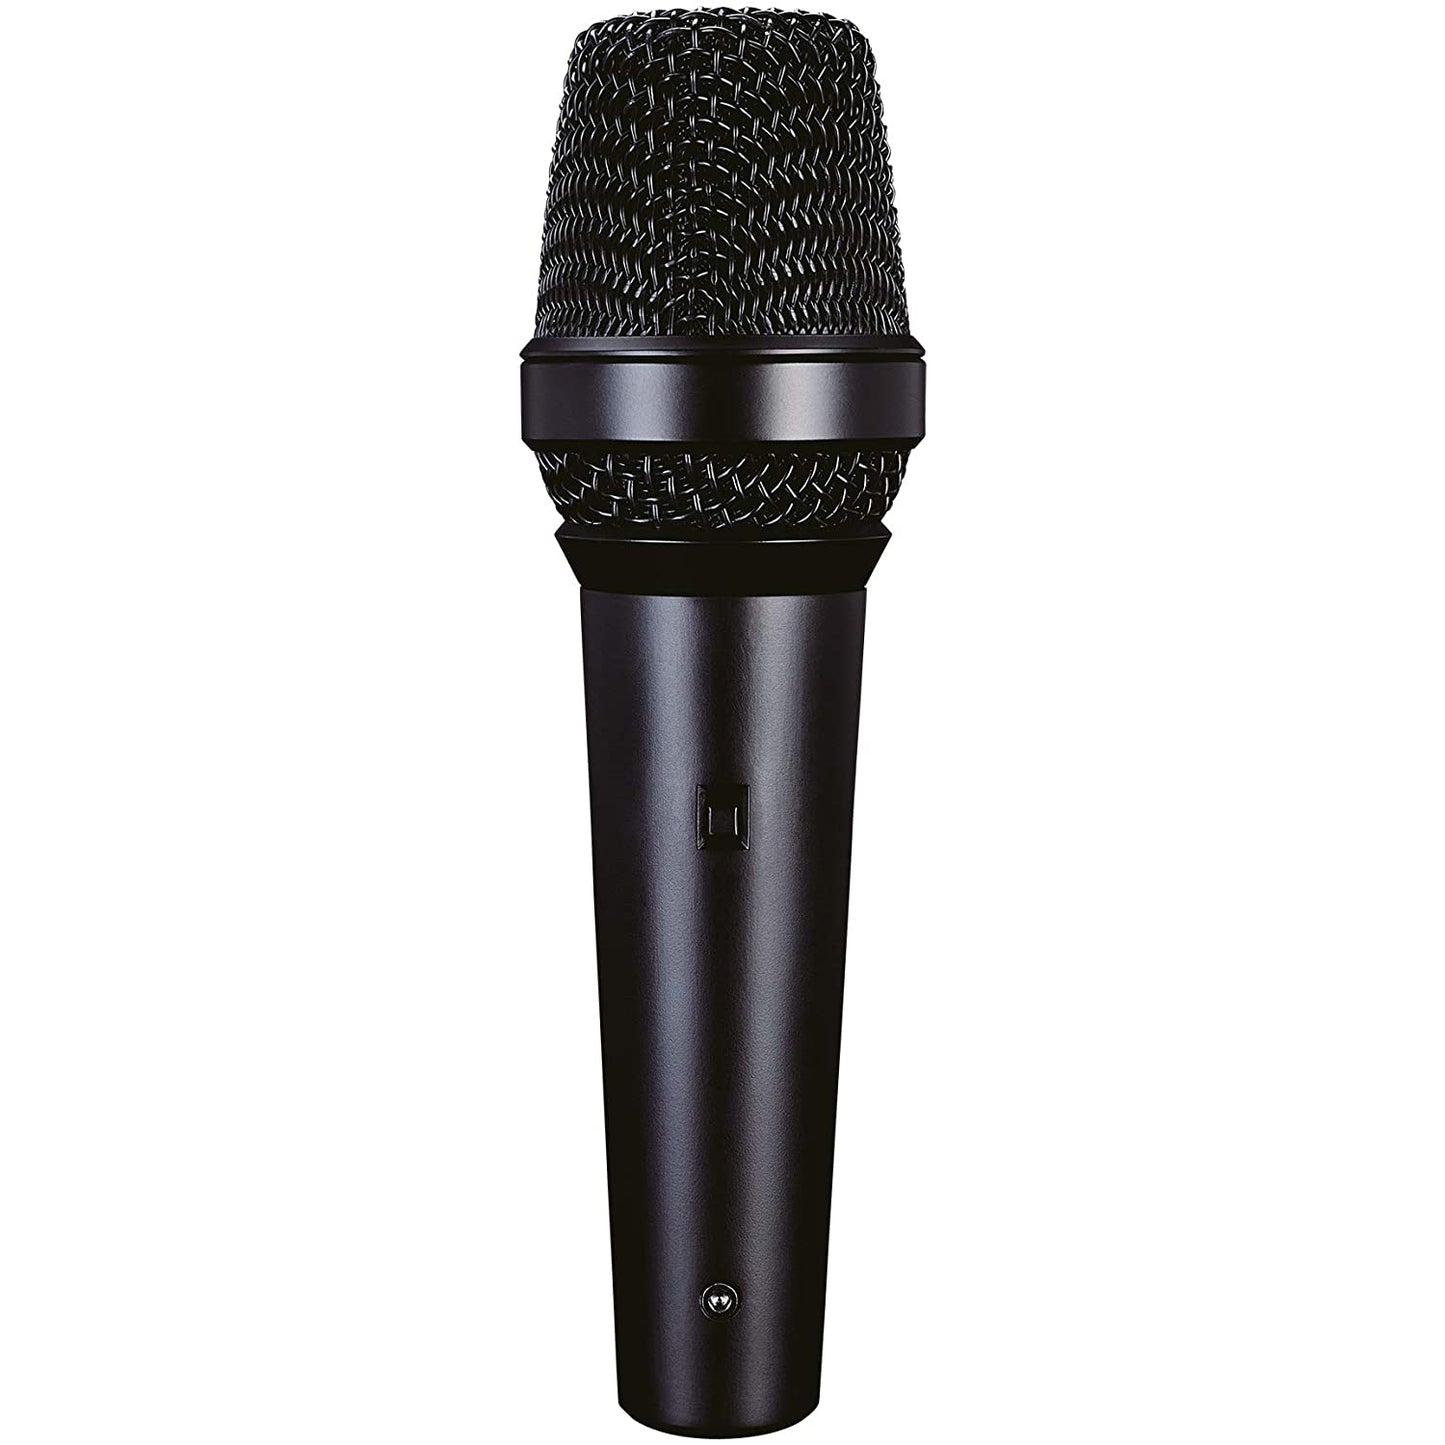 Lewitt MTP 350 CMs Handheld Condenser Vocal Mic with On/Off Switch